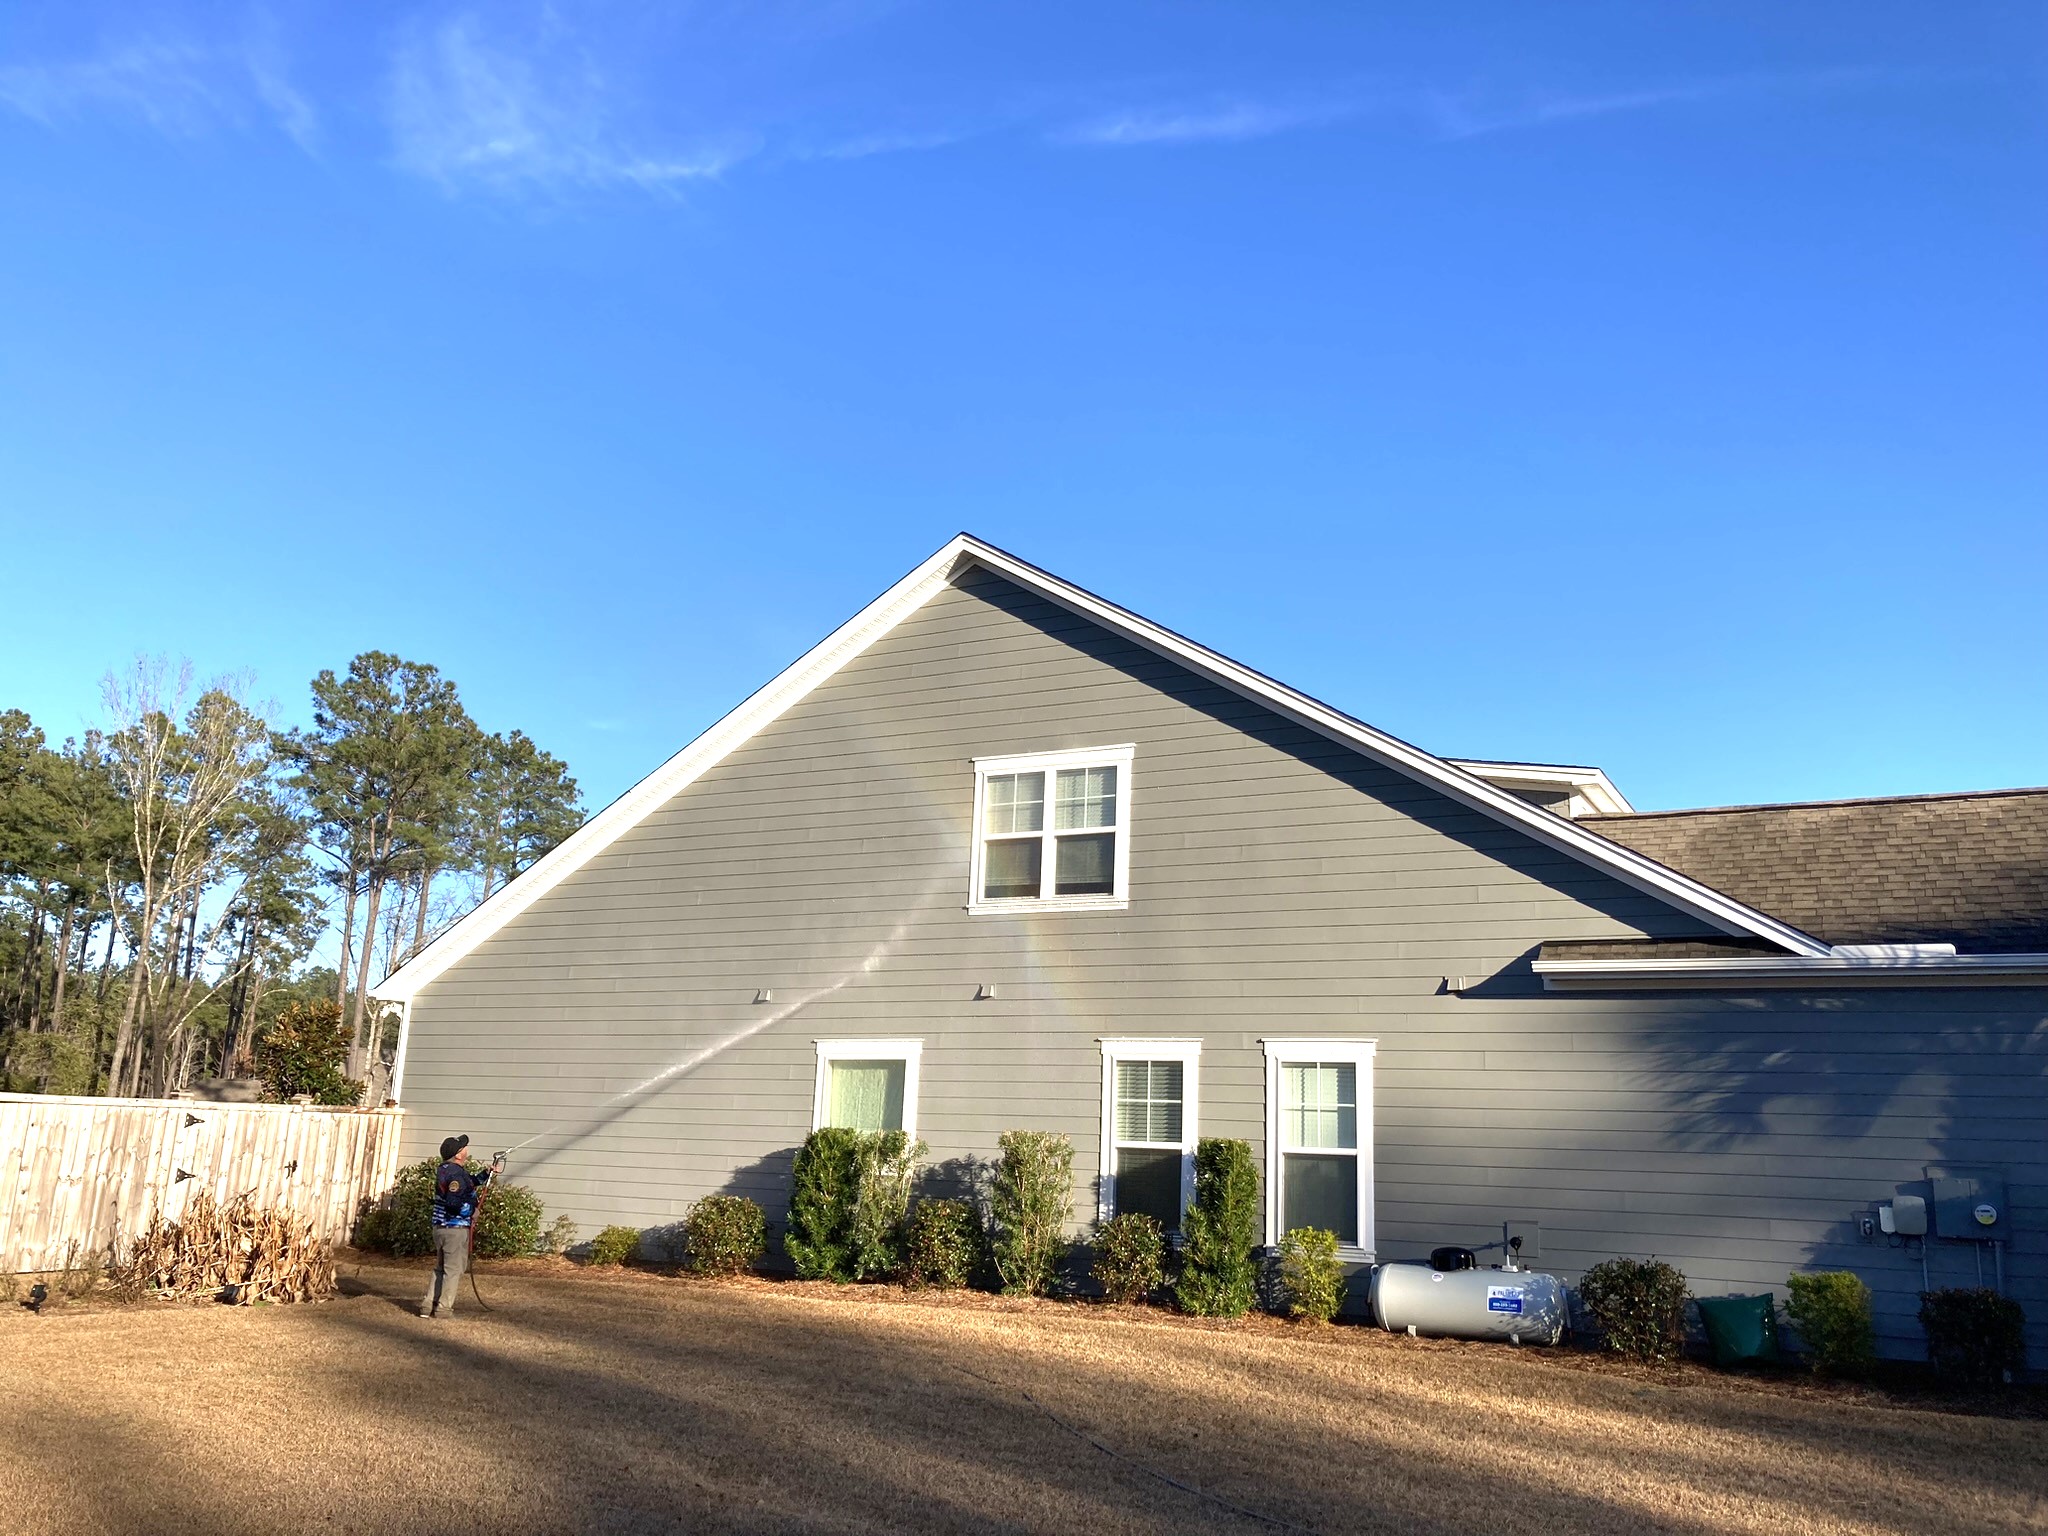 House Wash on Painted Home in Hugar South Carolina